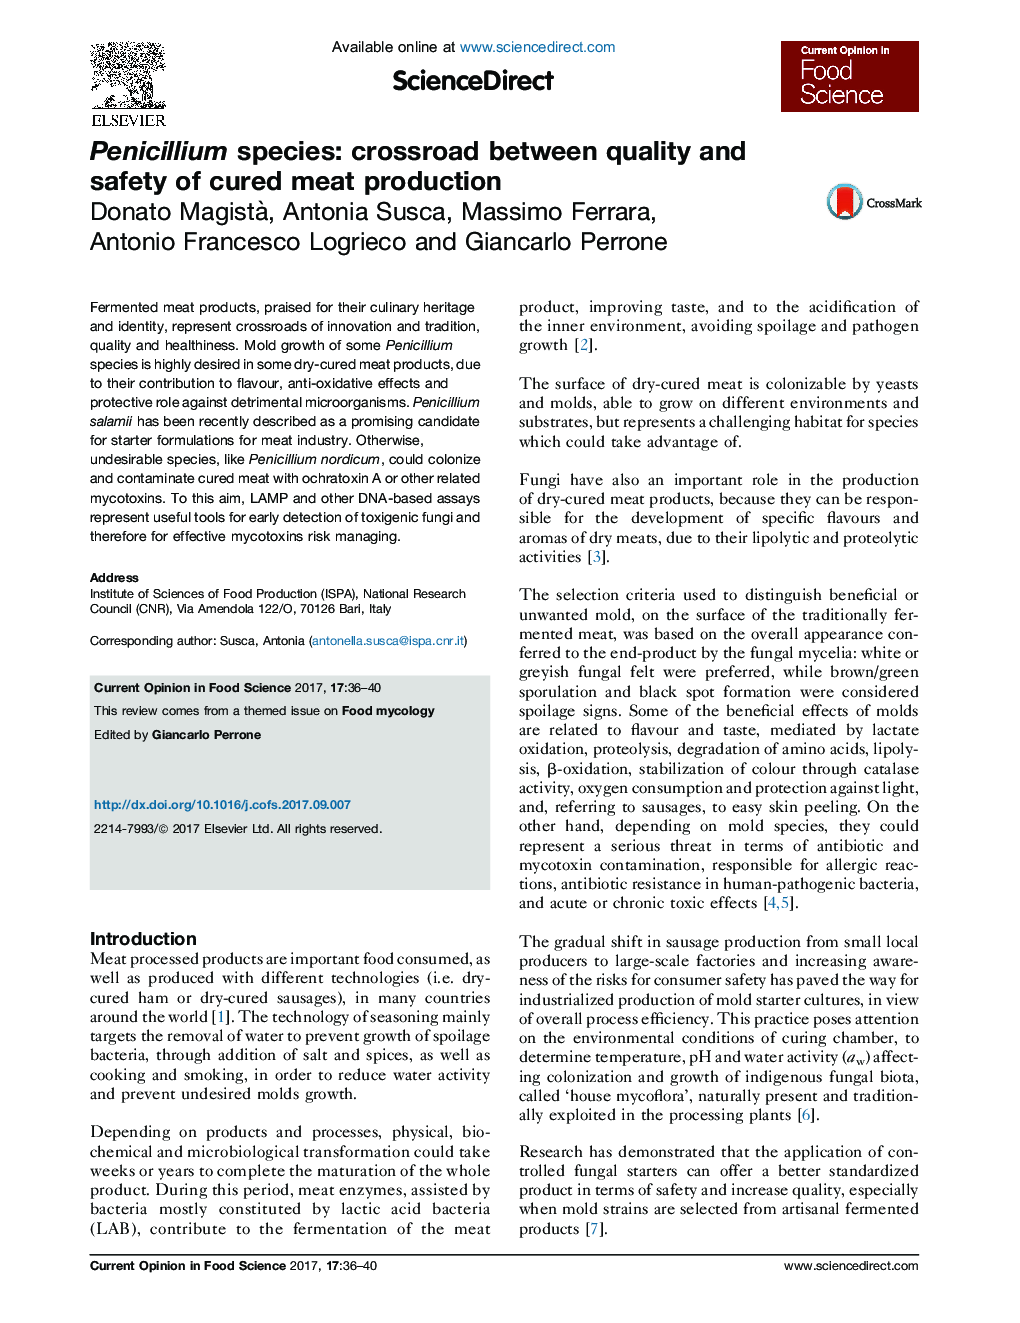 Penicillium species: crossroad between quality and safety of cured meat production